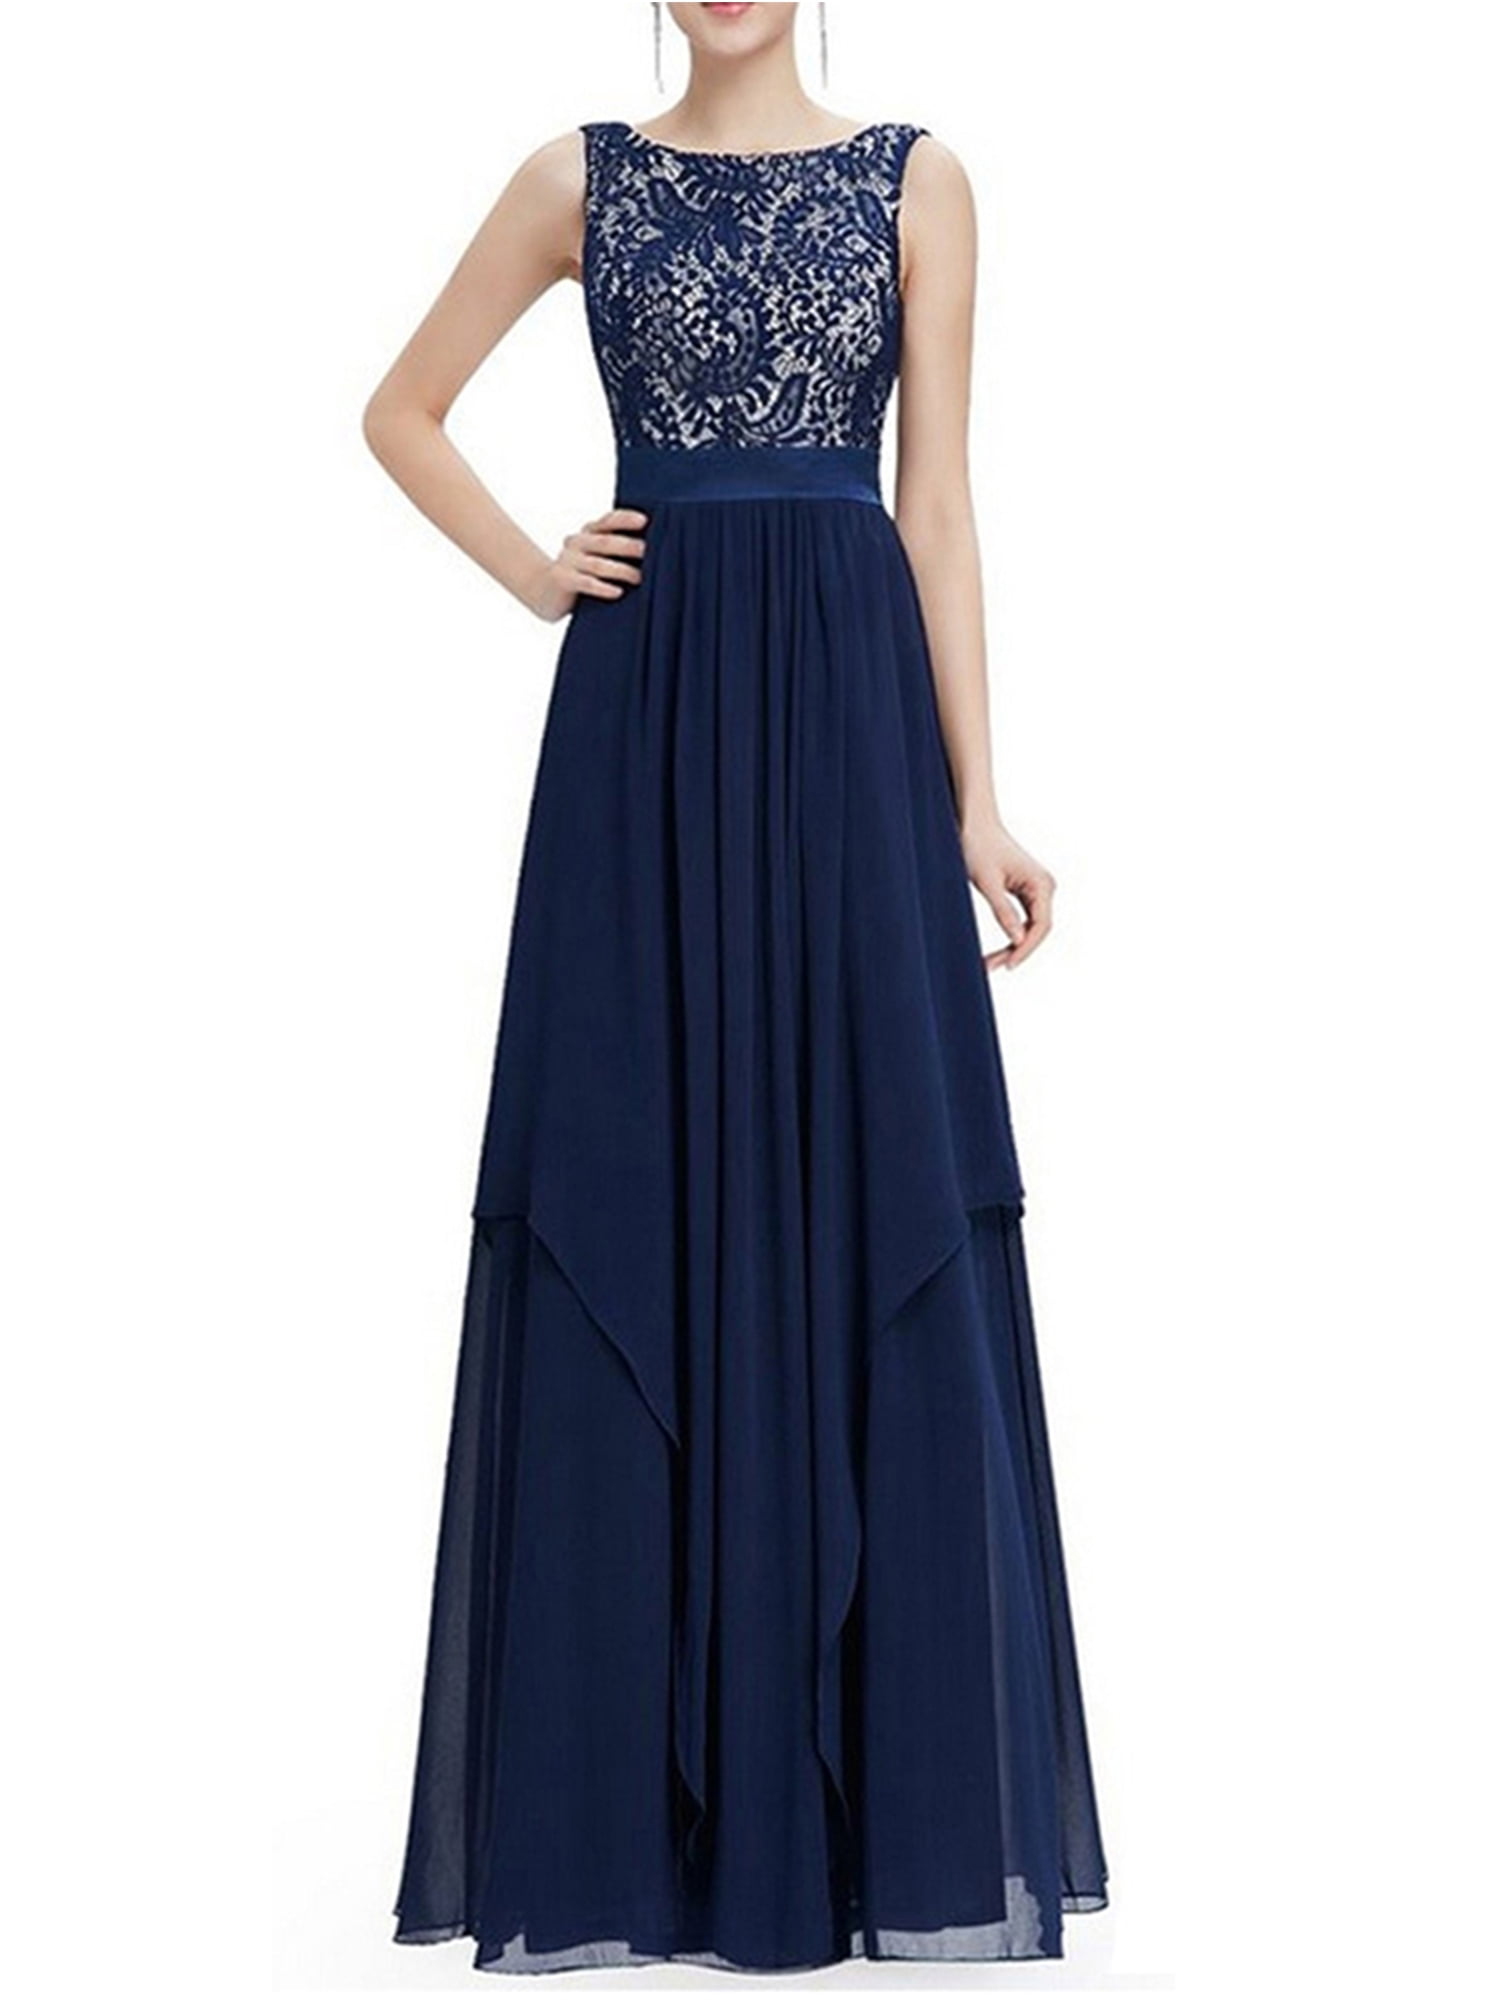 Women's Long Maxi Evening Cocktail Party Prom Bridesmaid Ball Gown Chiffon Dress